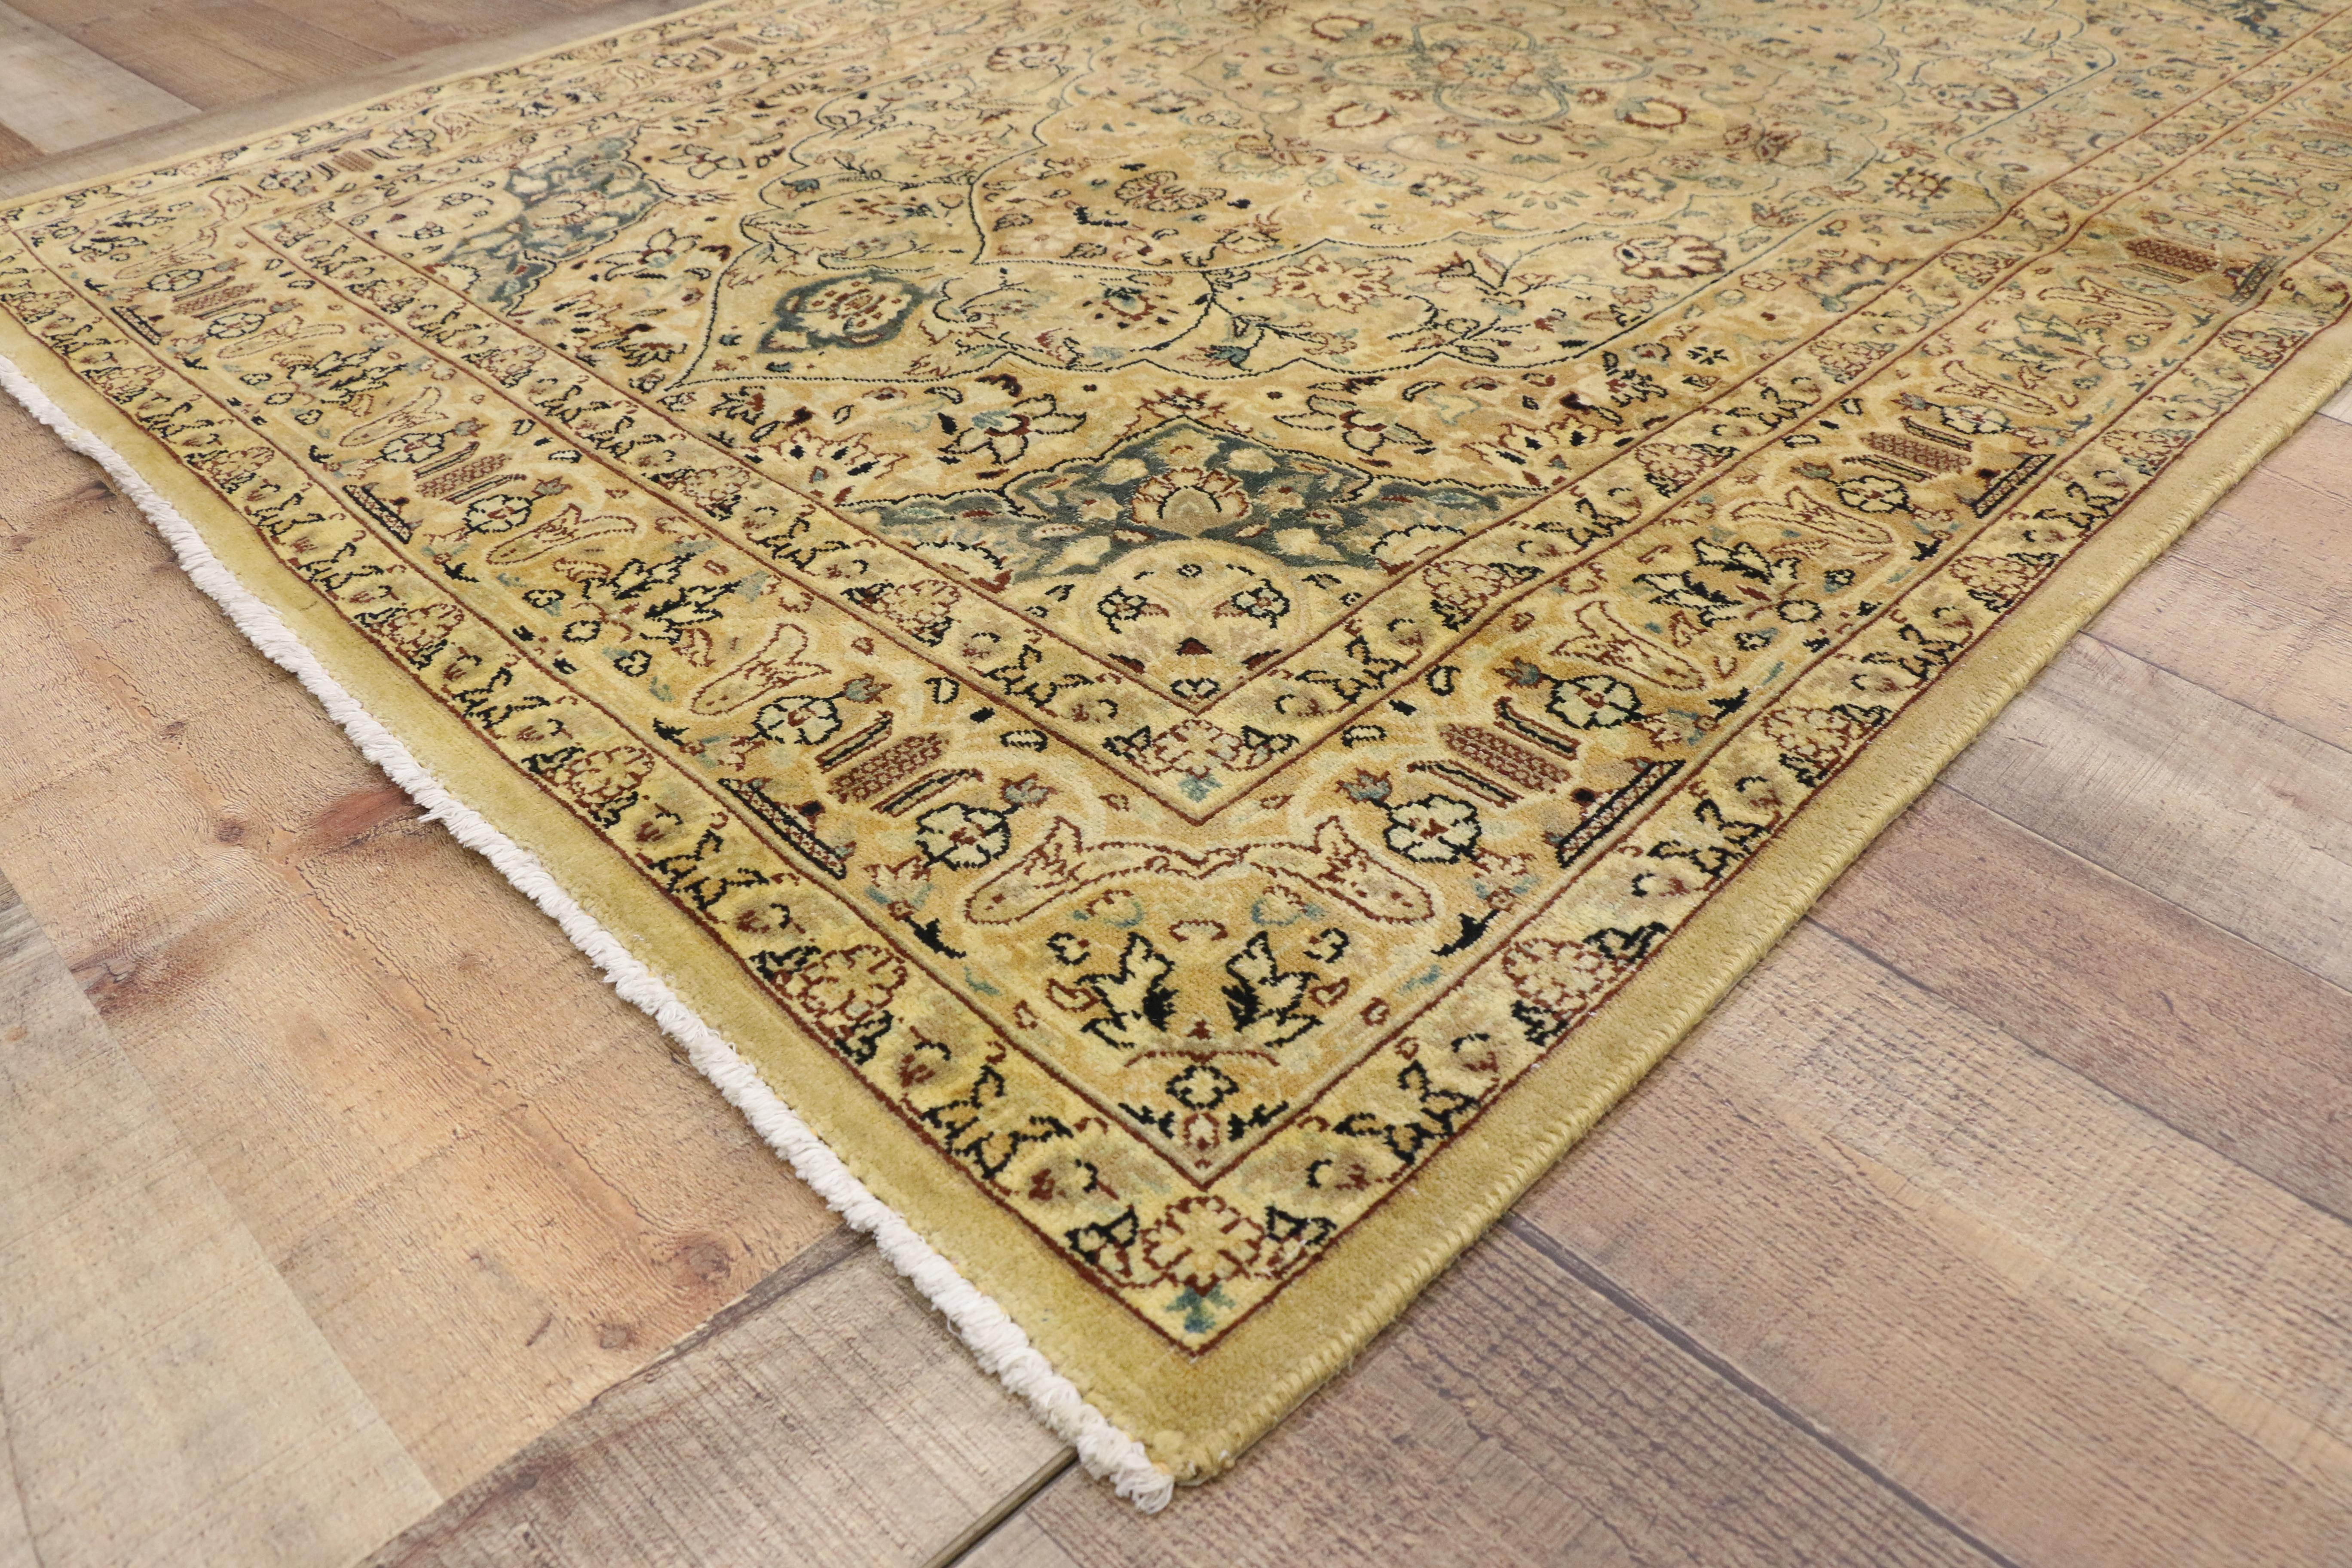 74339, vintage Indian Persian design accent rug with traditional modern style. This hand-knotted wool vintage Persian design accent rug features a large floral medallion set with a quatrefoil pattern. Concentric lobed ovals surround creating a cut